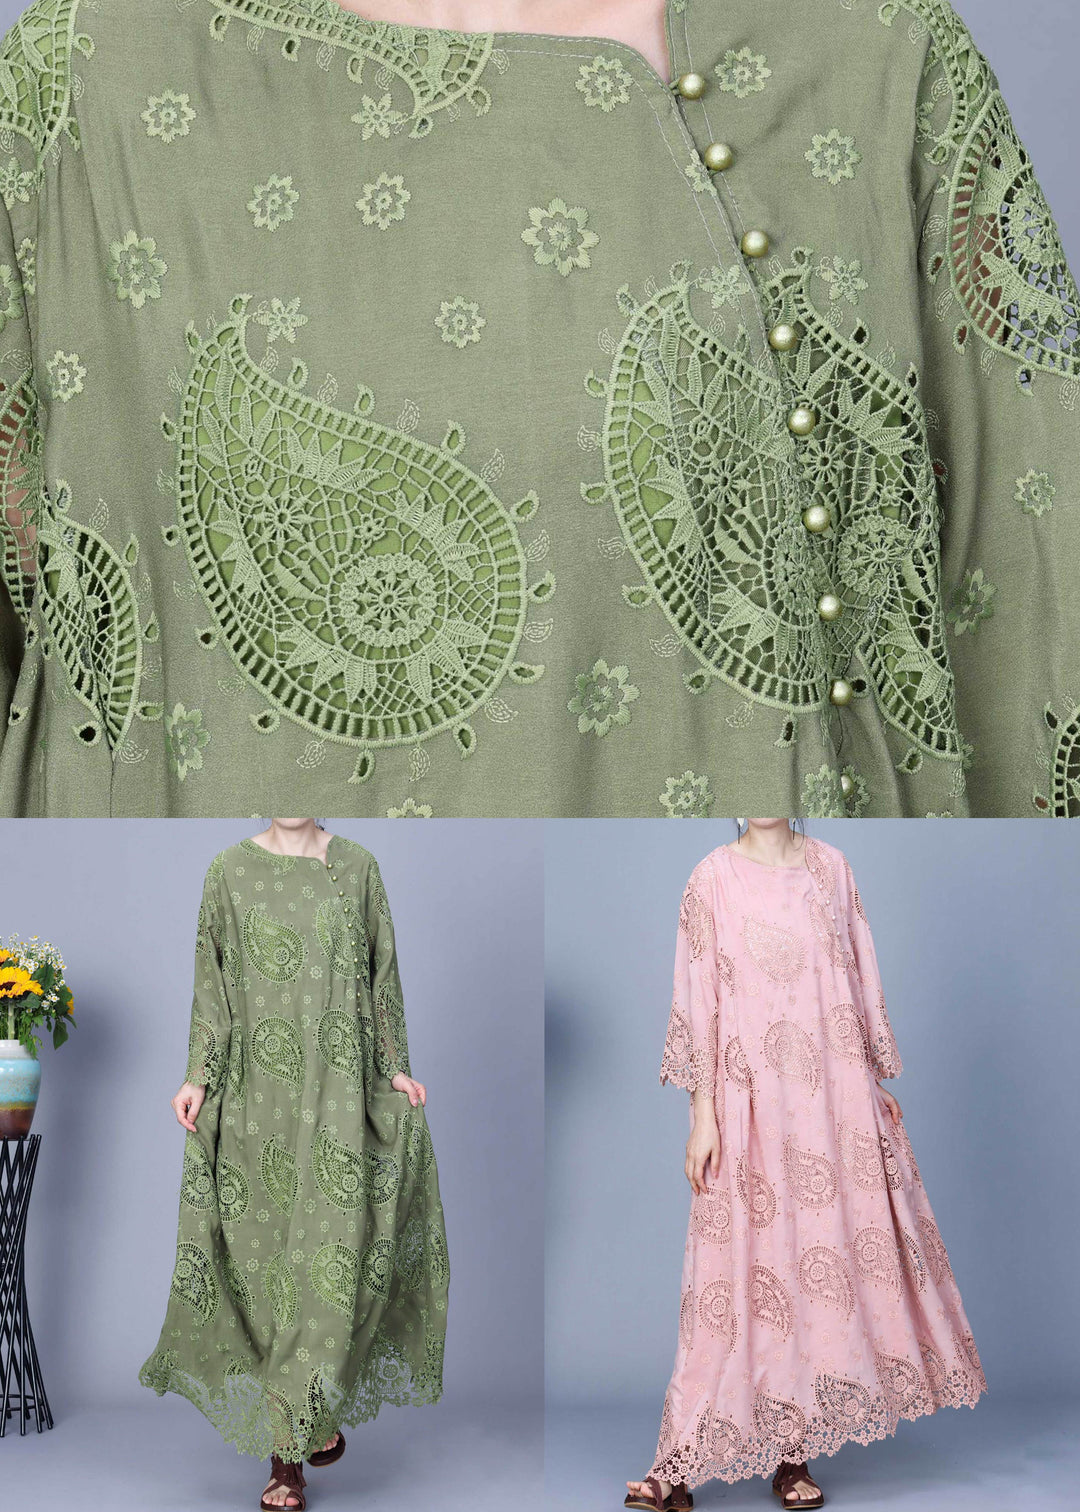 Loose Green Embroidered Button Cotton Maxi Dress Long Sleeve